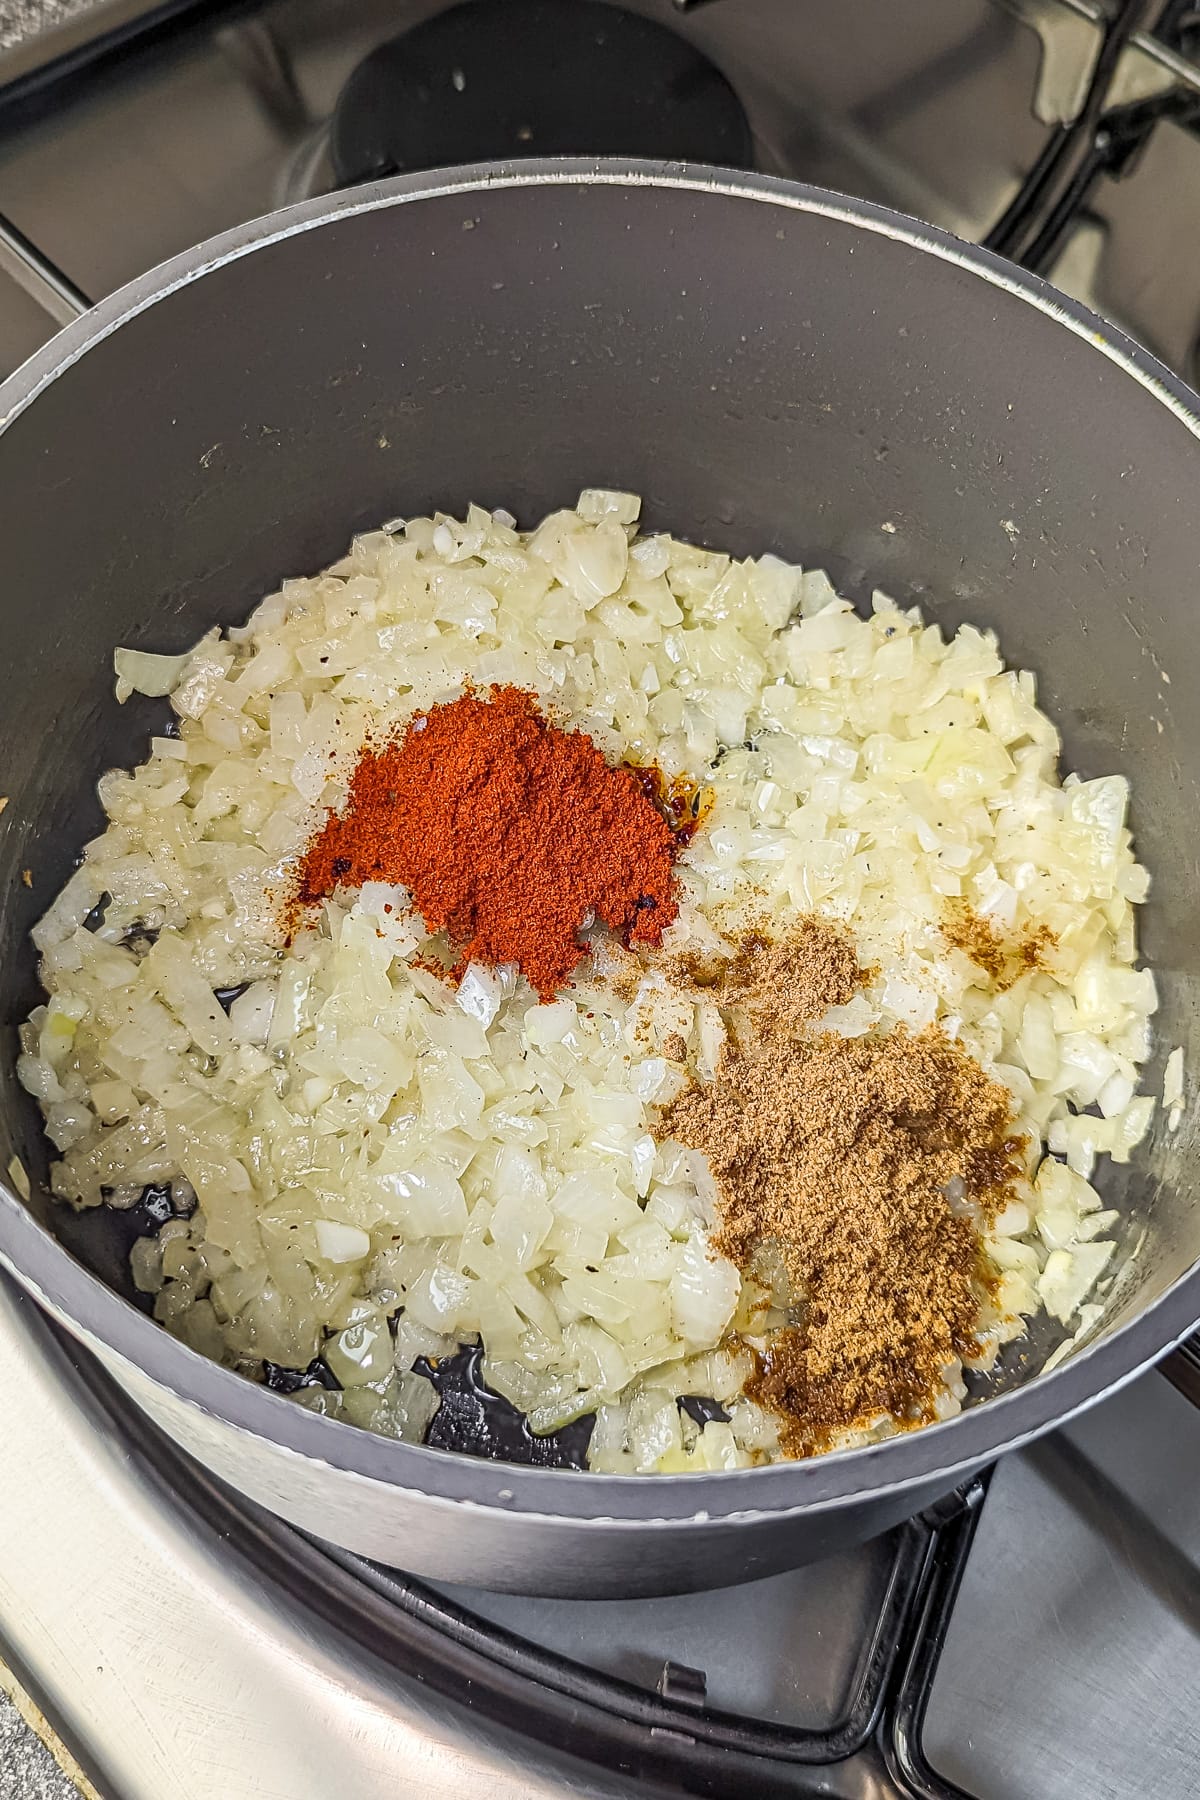 Spices including cumin and paprika added to the sautéed onions in the pot.